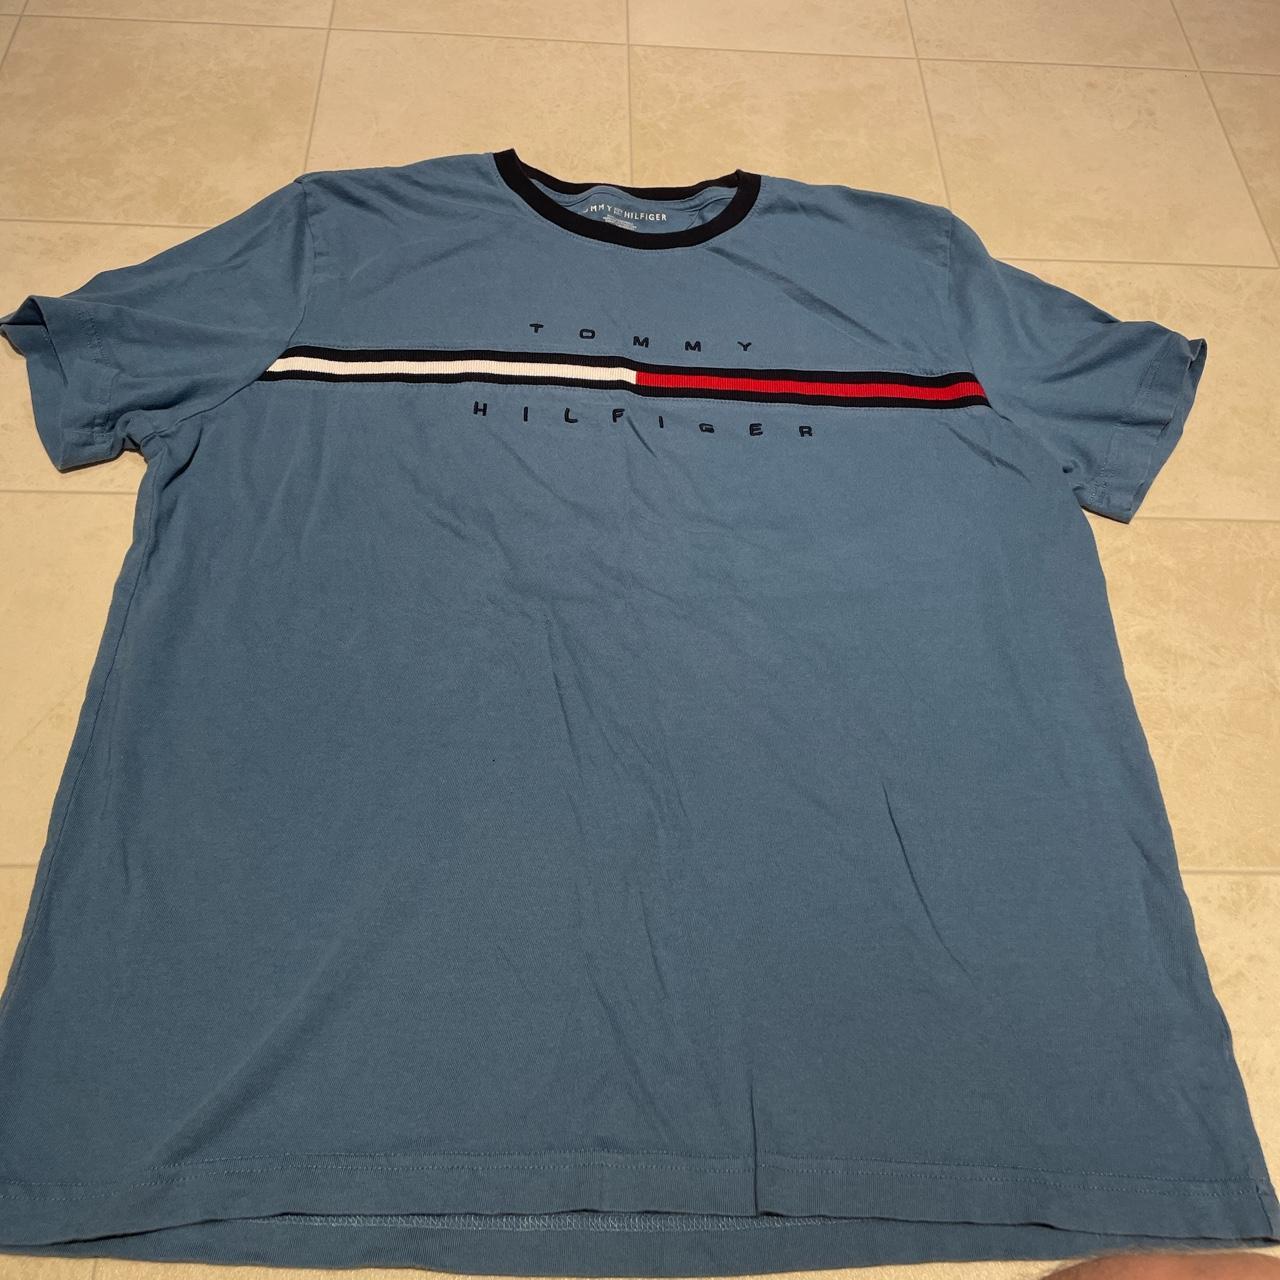 MENS TOMMY HILLFIGER TEE PERFECT CONDITION #skate... - Depop